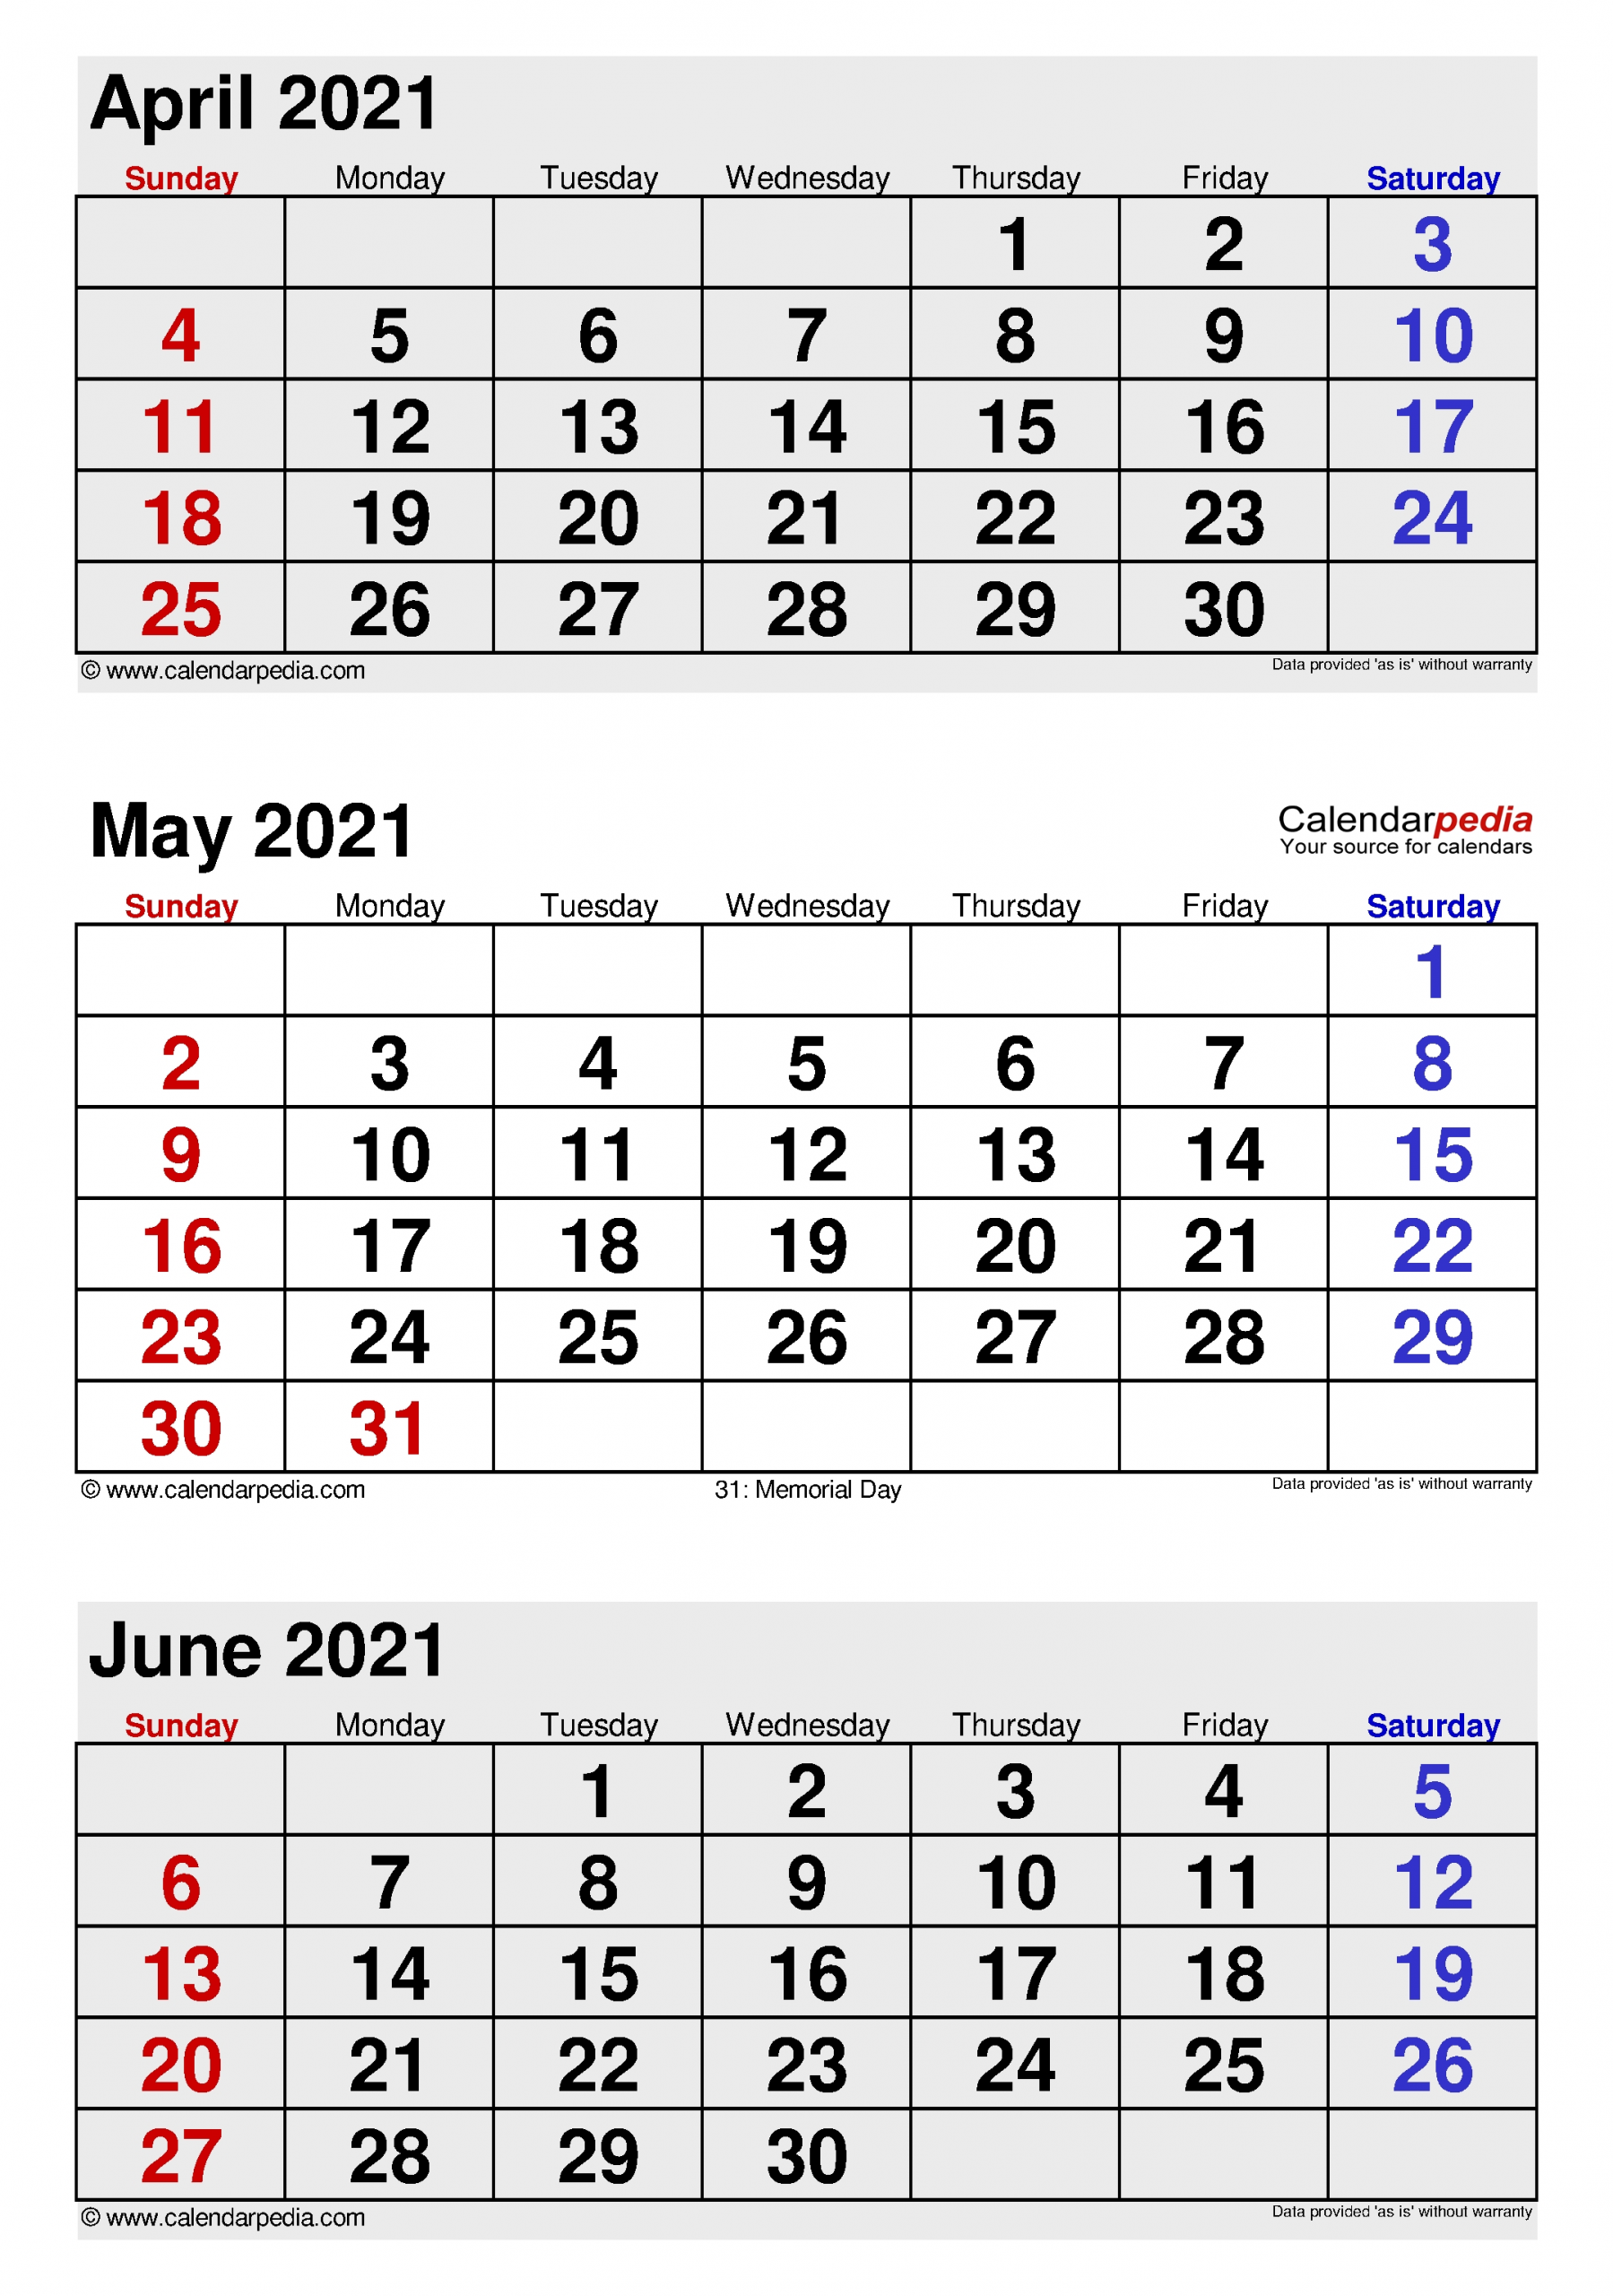 May 2021 Calendar | Templates For Word, Excel And Pdf-2021 2 Page Per Month May Calendar Picture